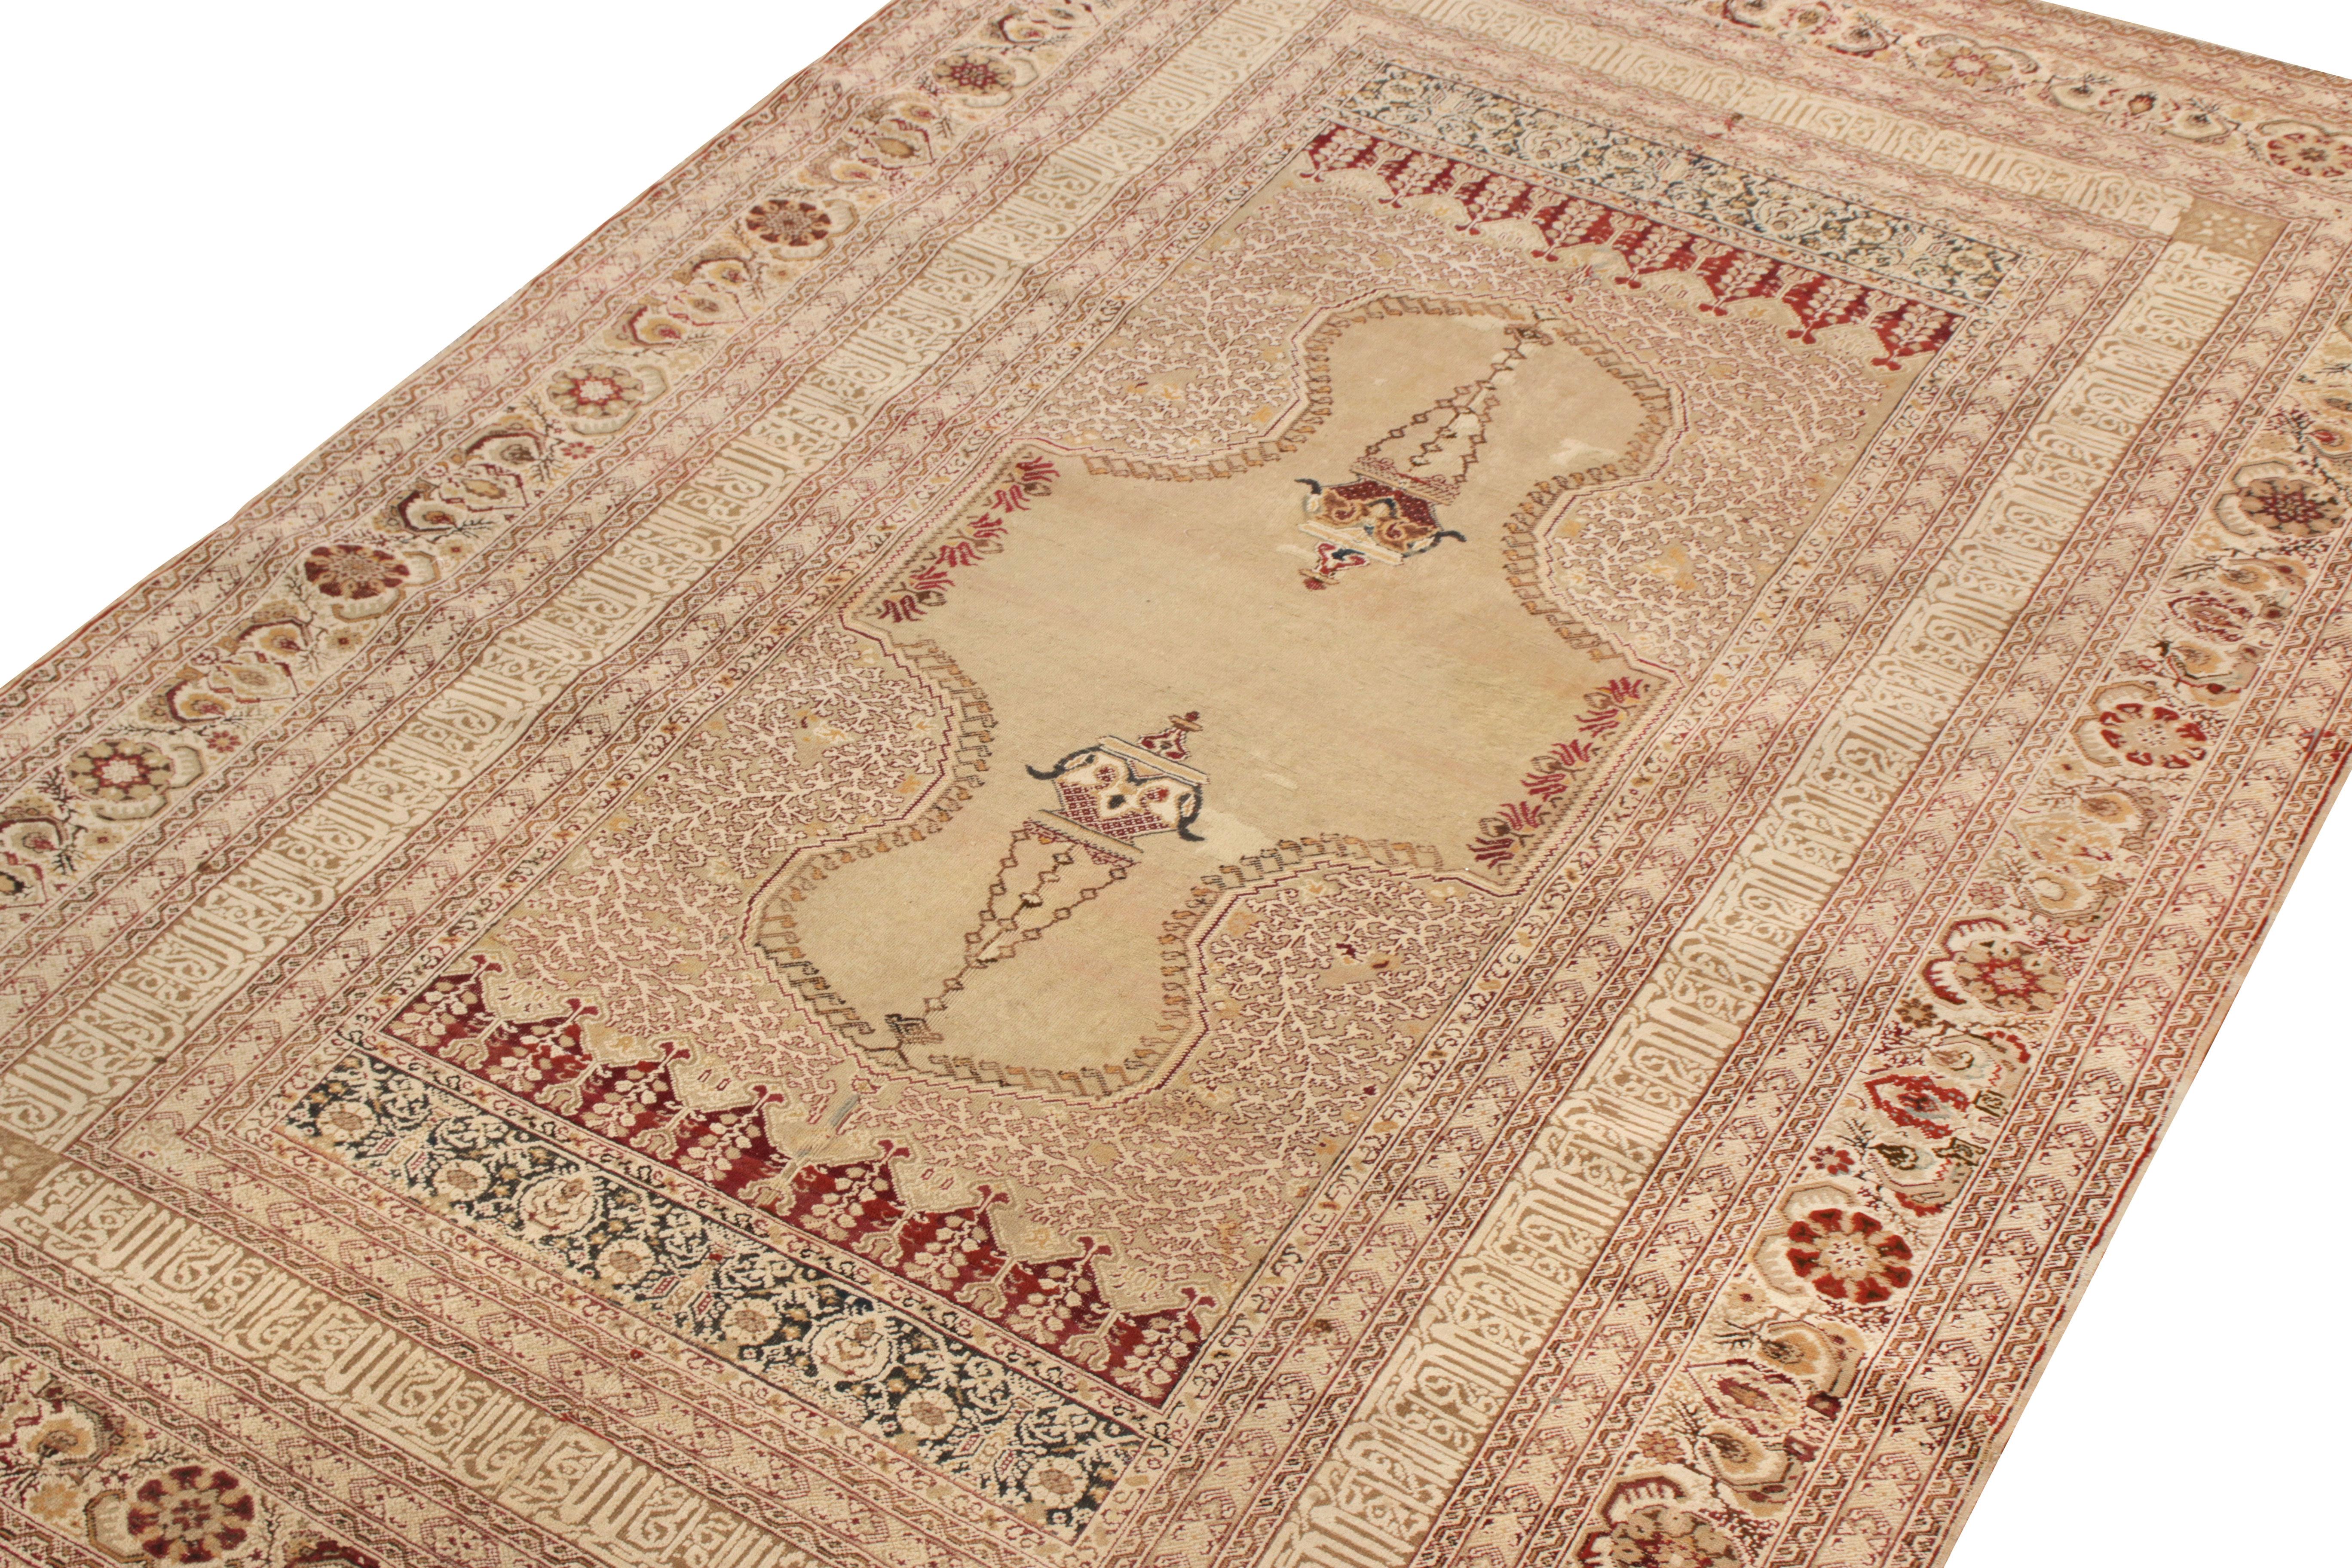 Other Hand-Knotted Antique Ghiordes Rug in Beige-Brown Floral Pattern by Rug & Kilim For Sale